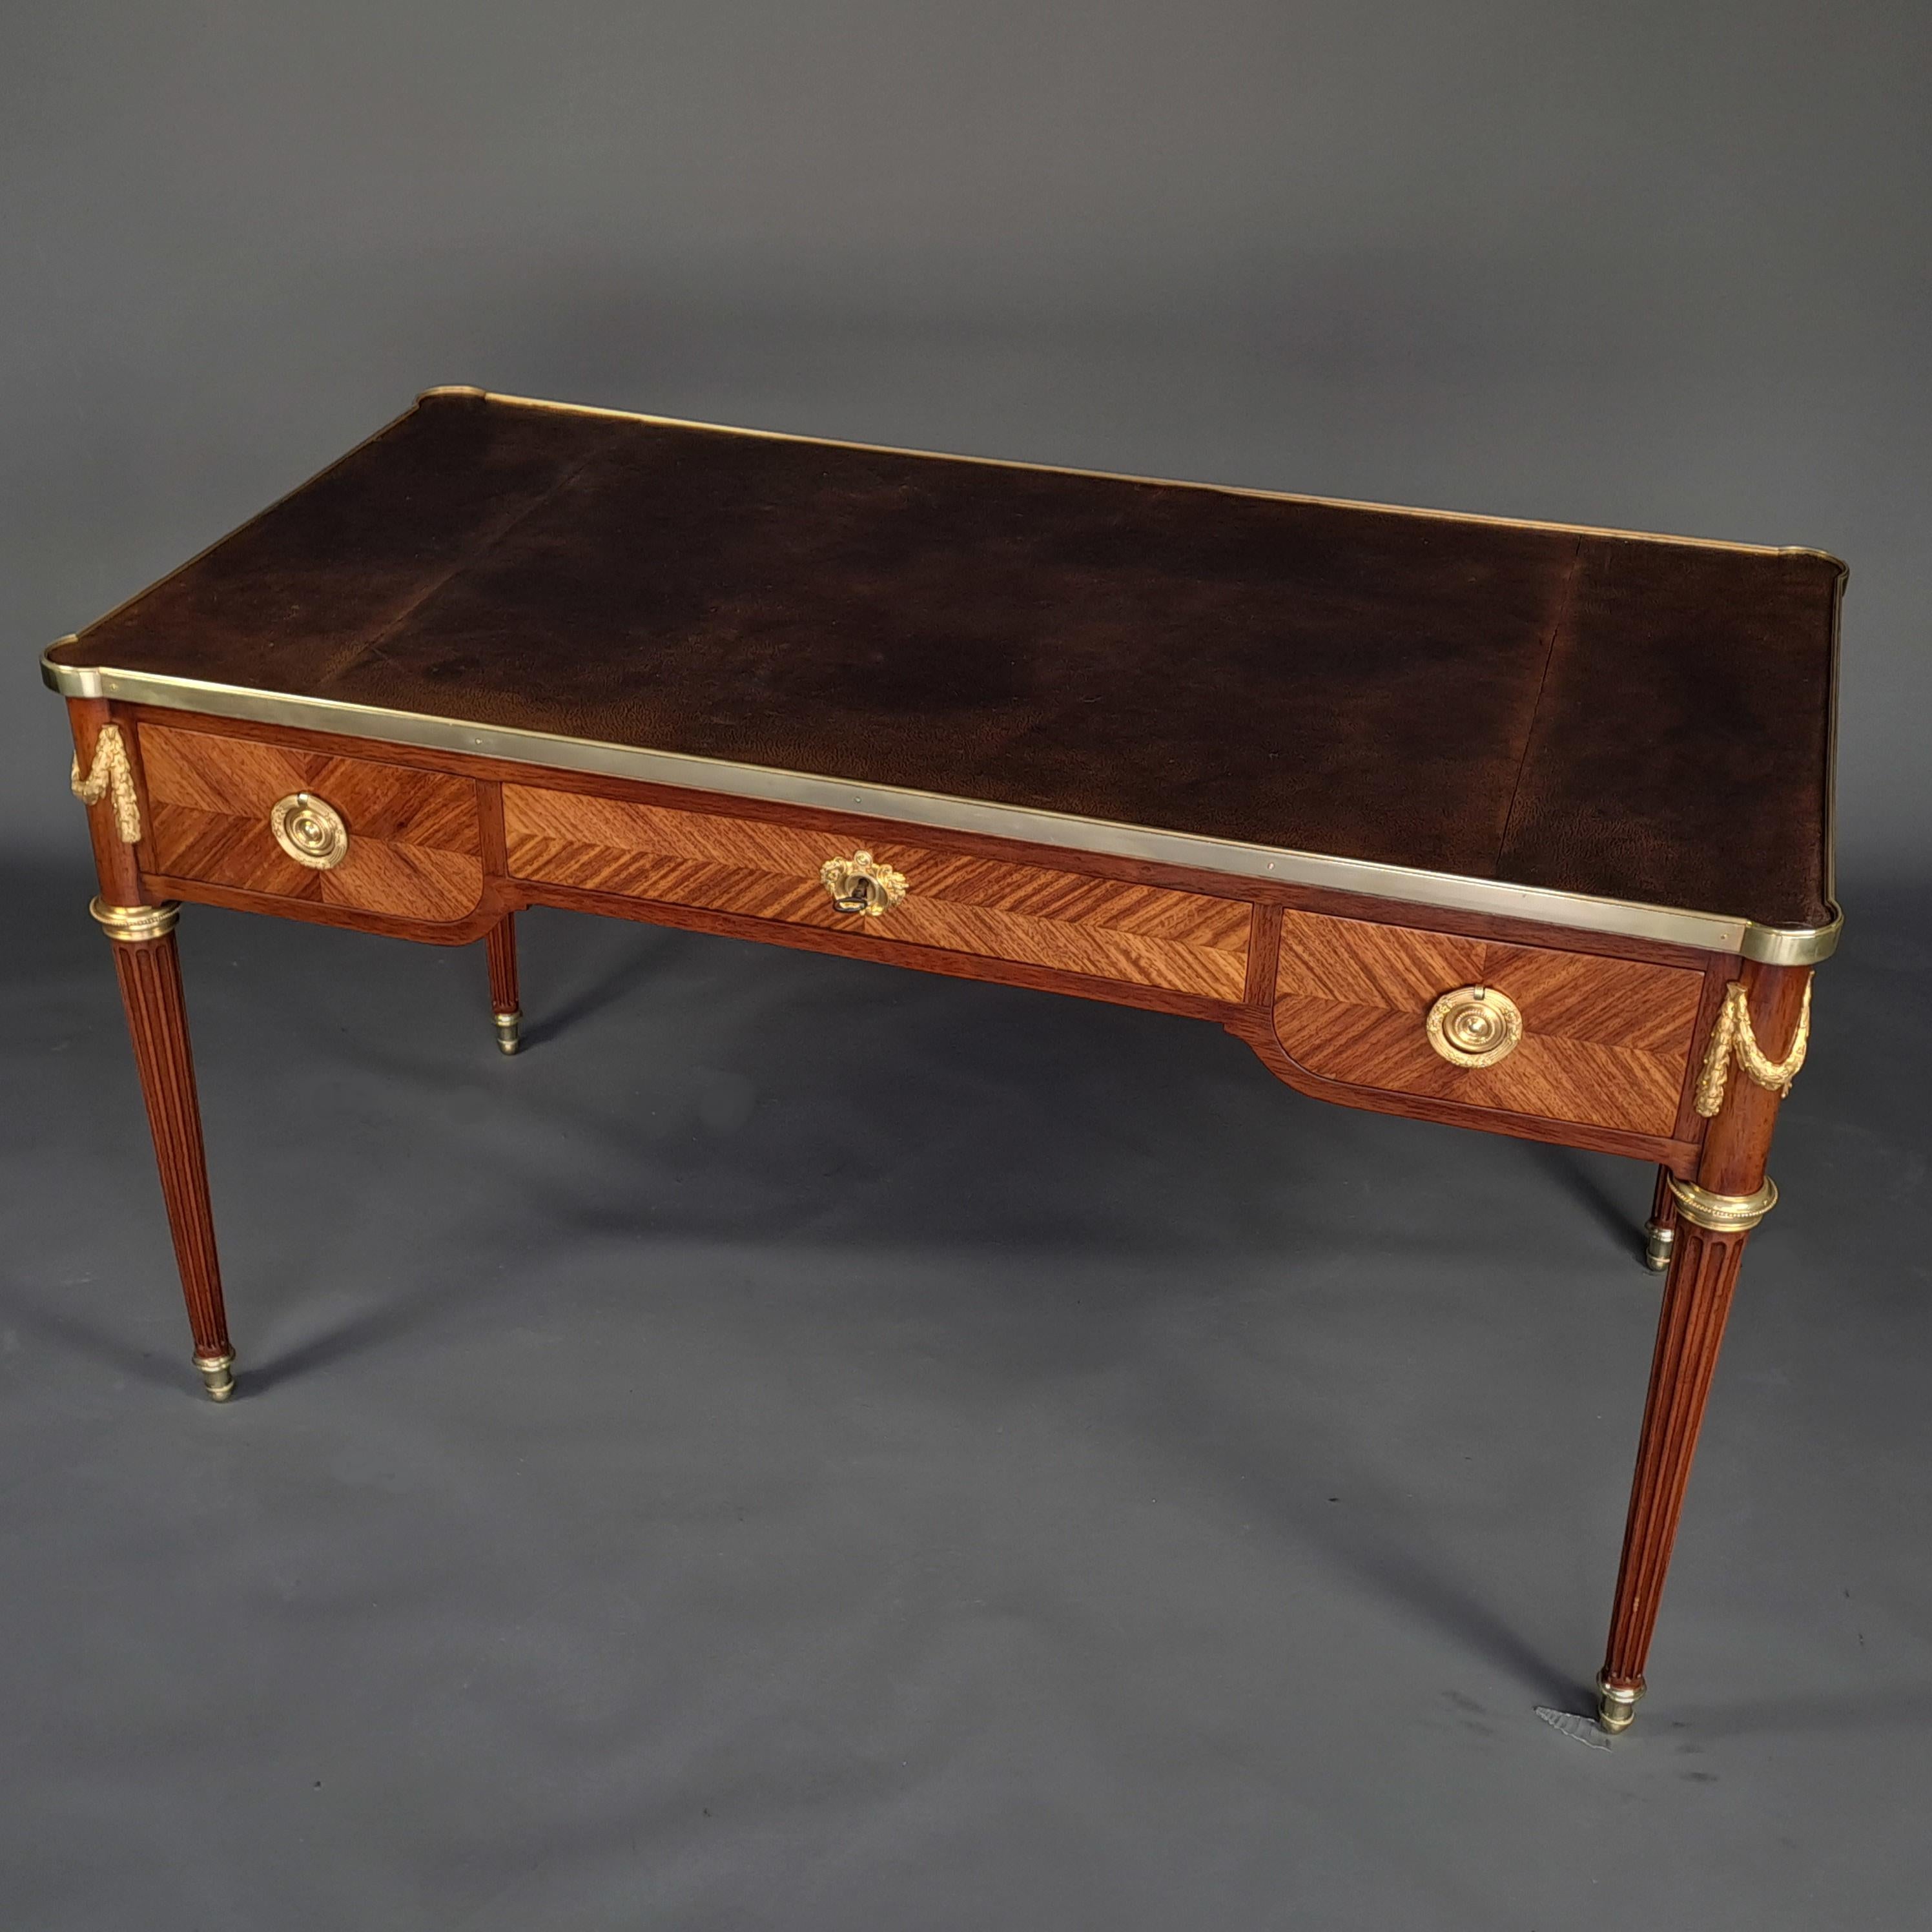 Early 20th Century Bureau Plat Louis XVI Style in Marquetry and Gilt Bronze For Sale